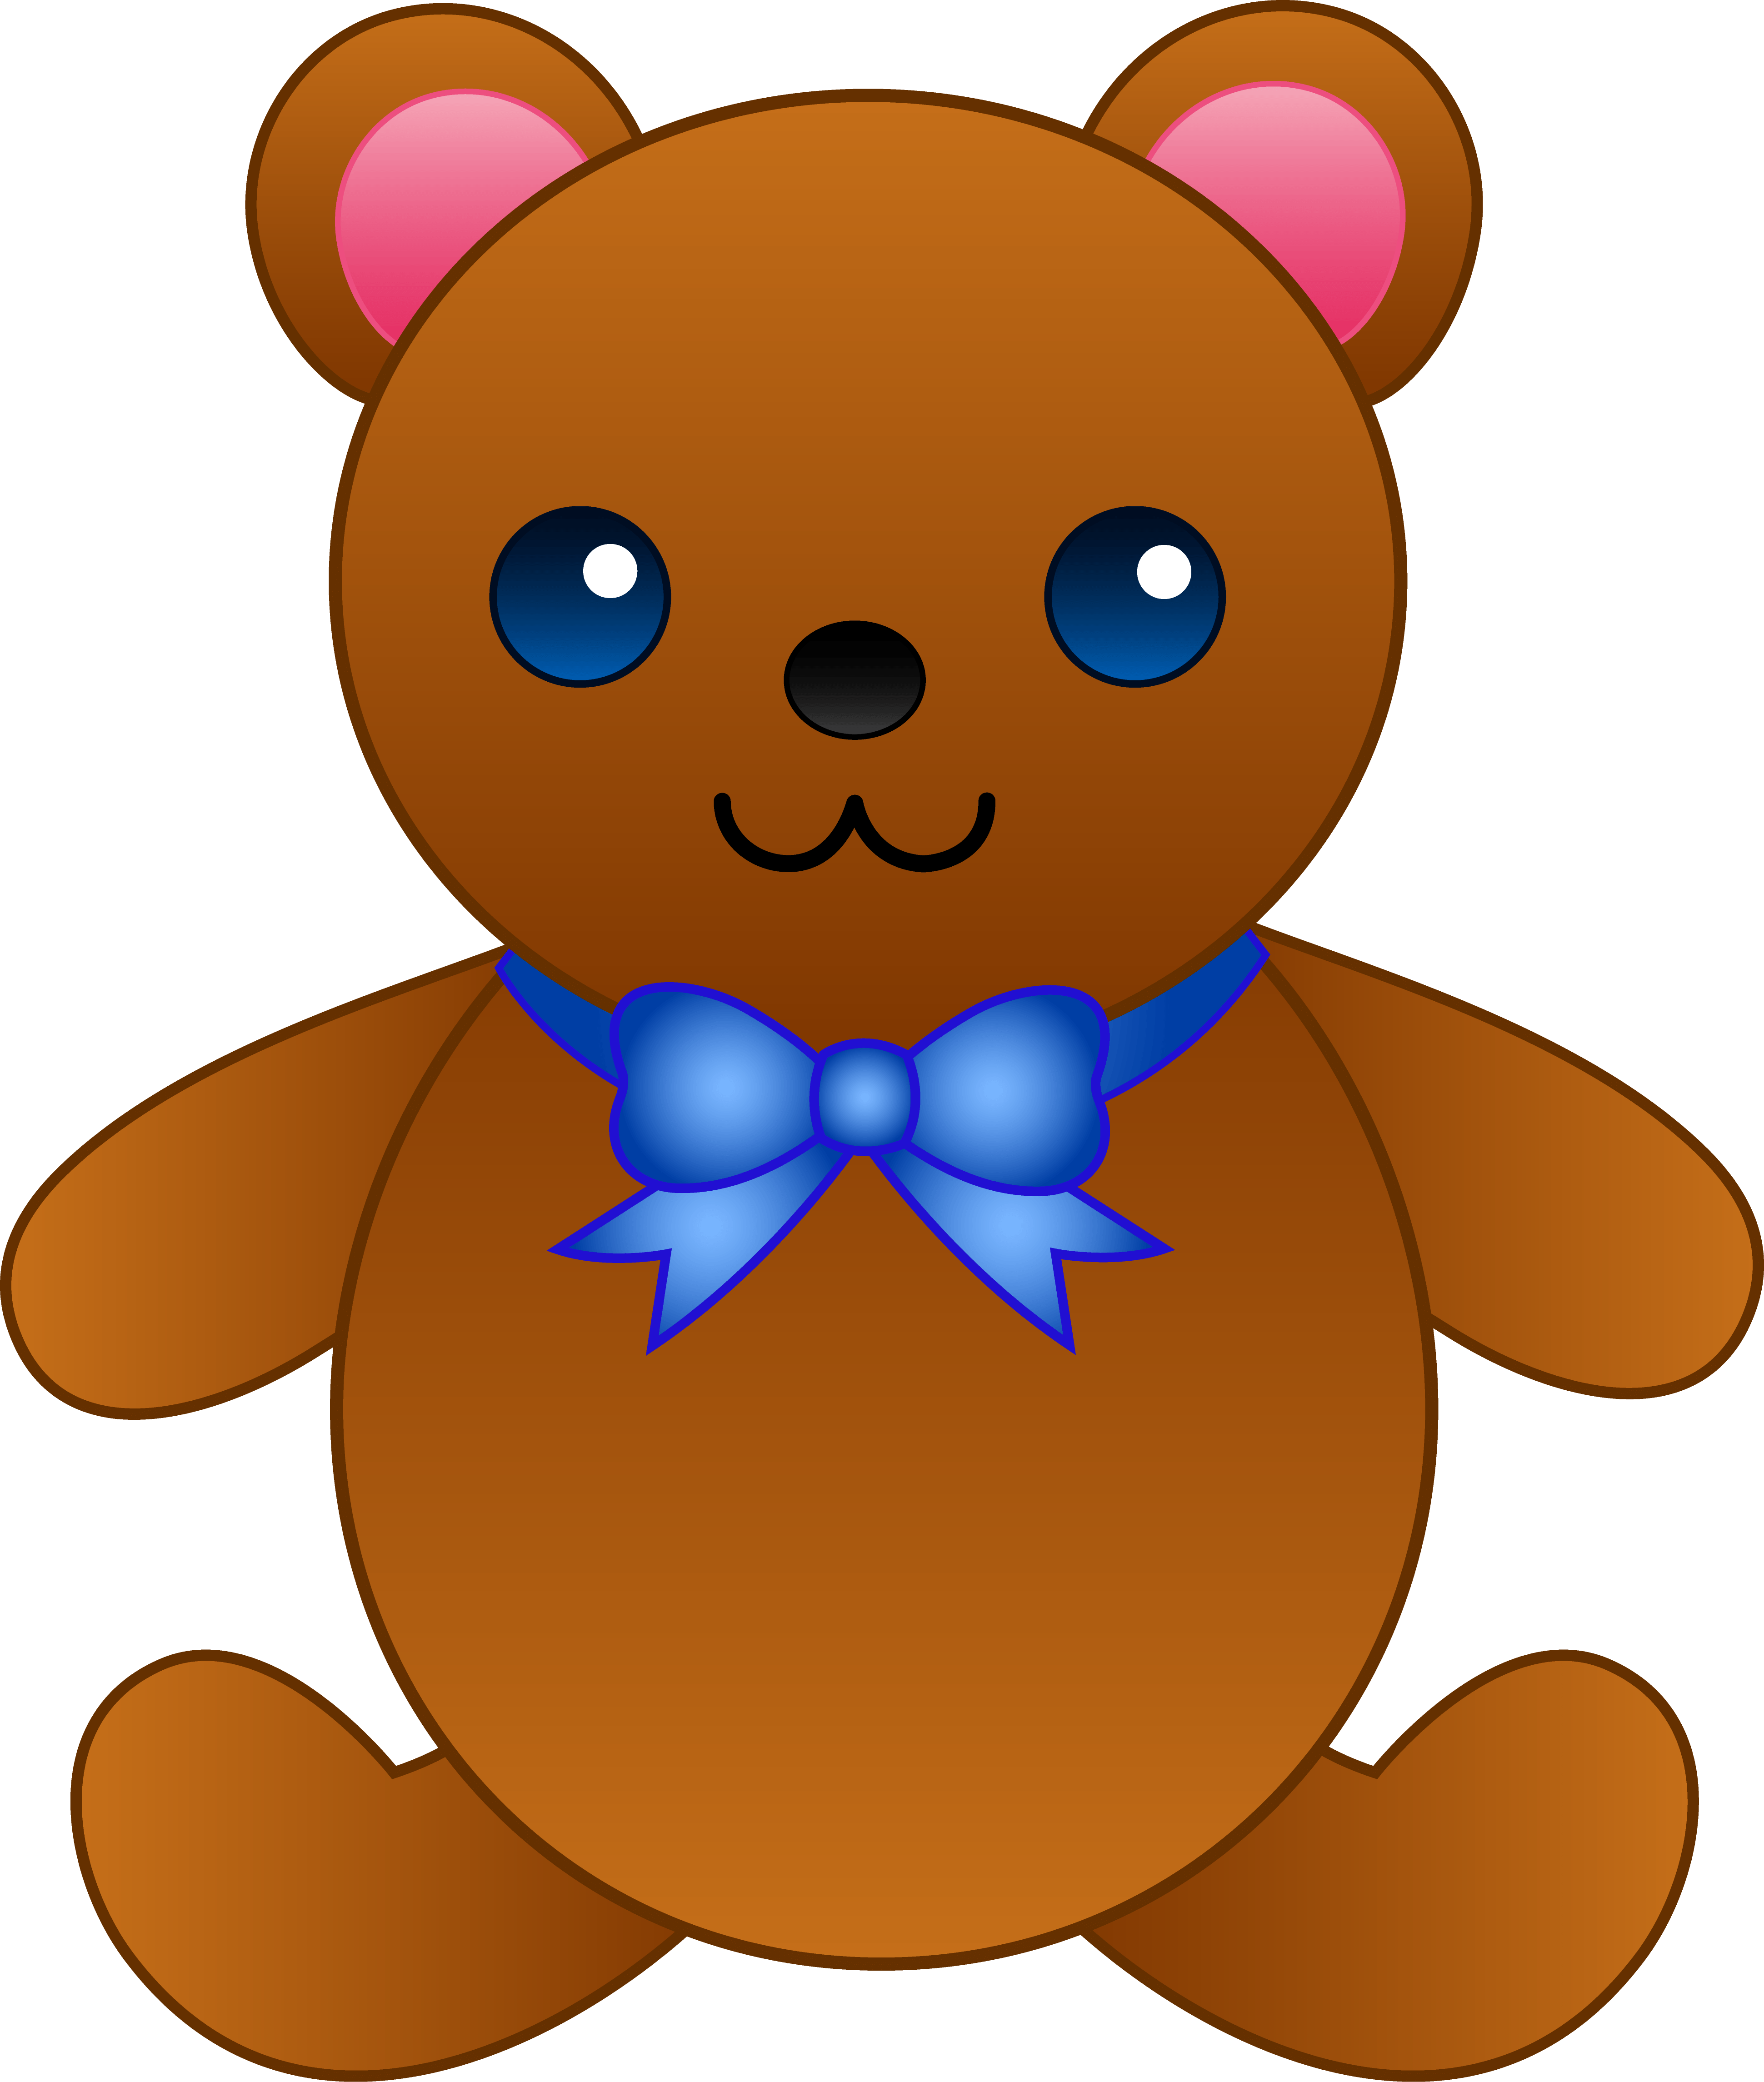 3881 X 4581 6 - Teddy Bear Images Cartoon Clipart (3881x4581), Png Download